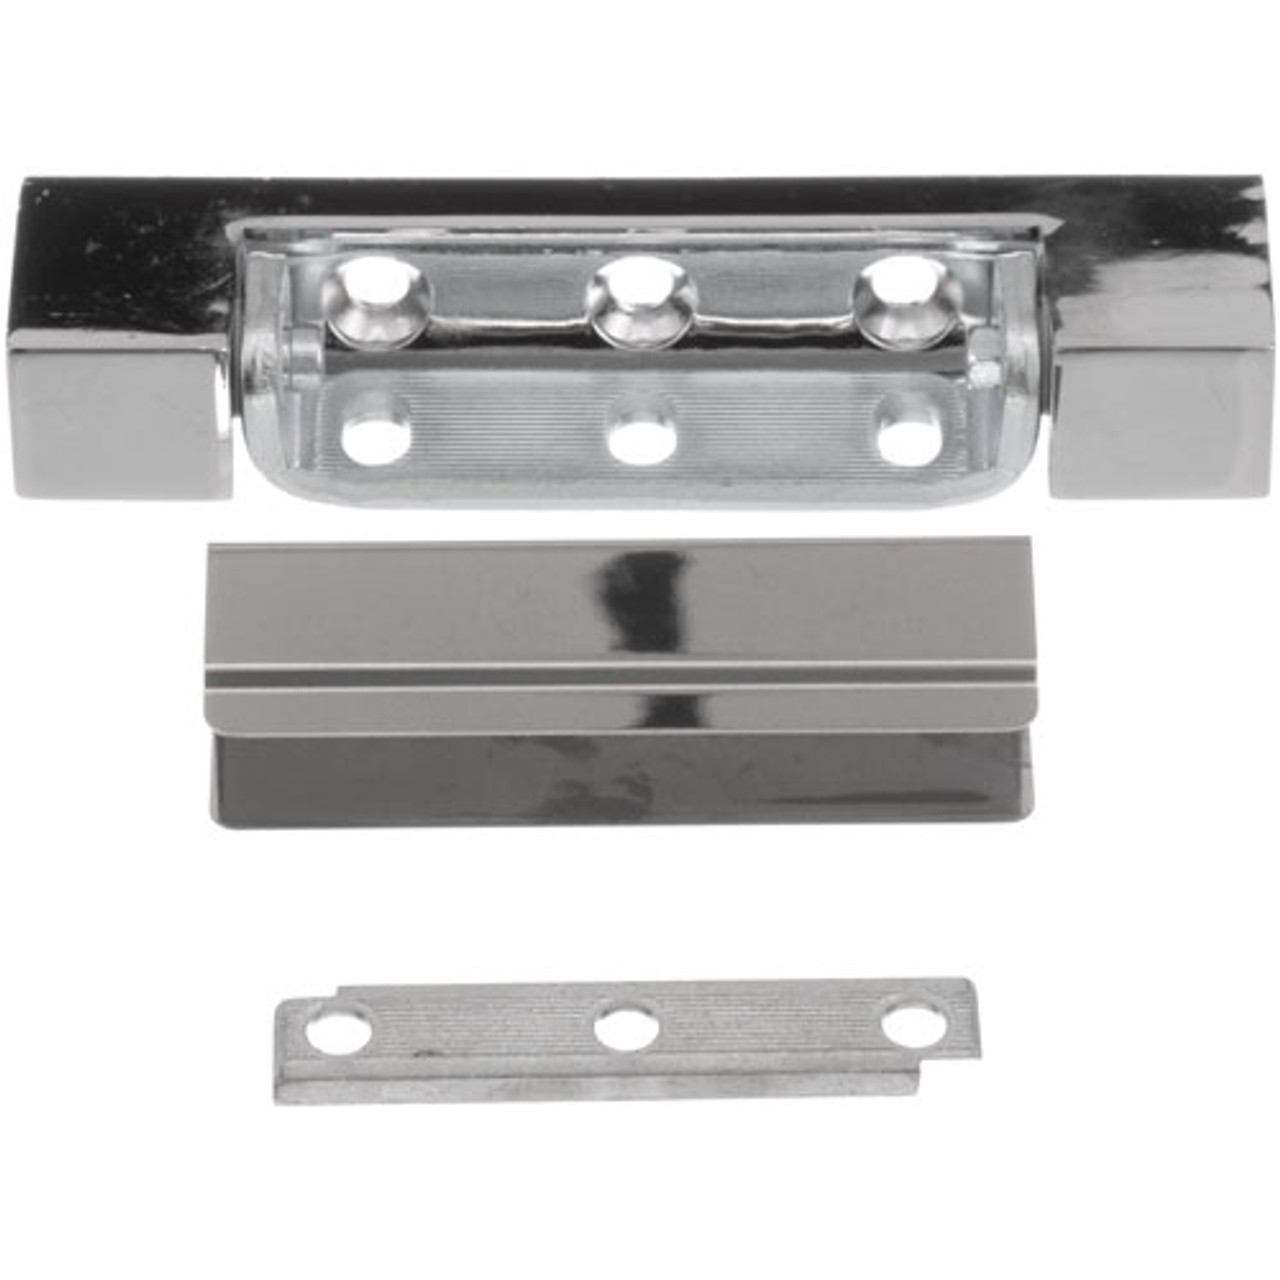 Hinge - Replacement Part For Hobart 261629